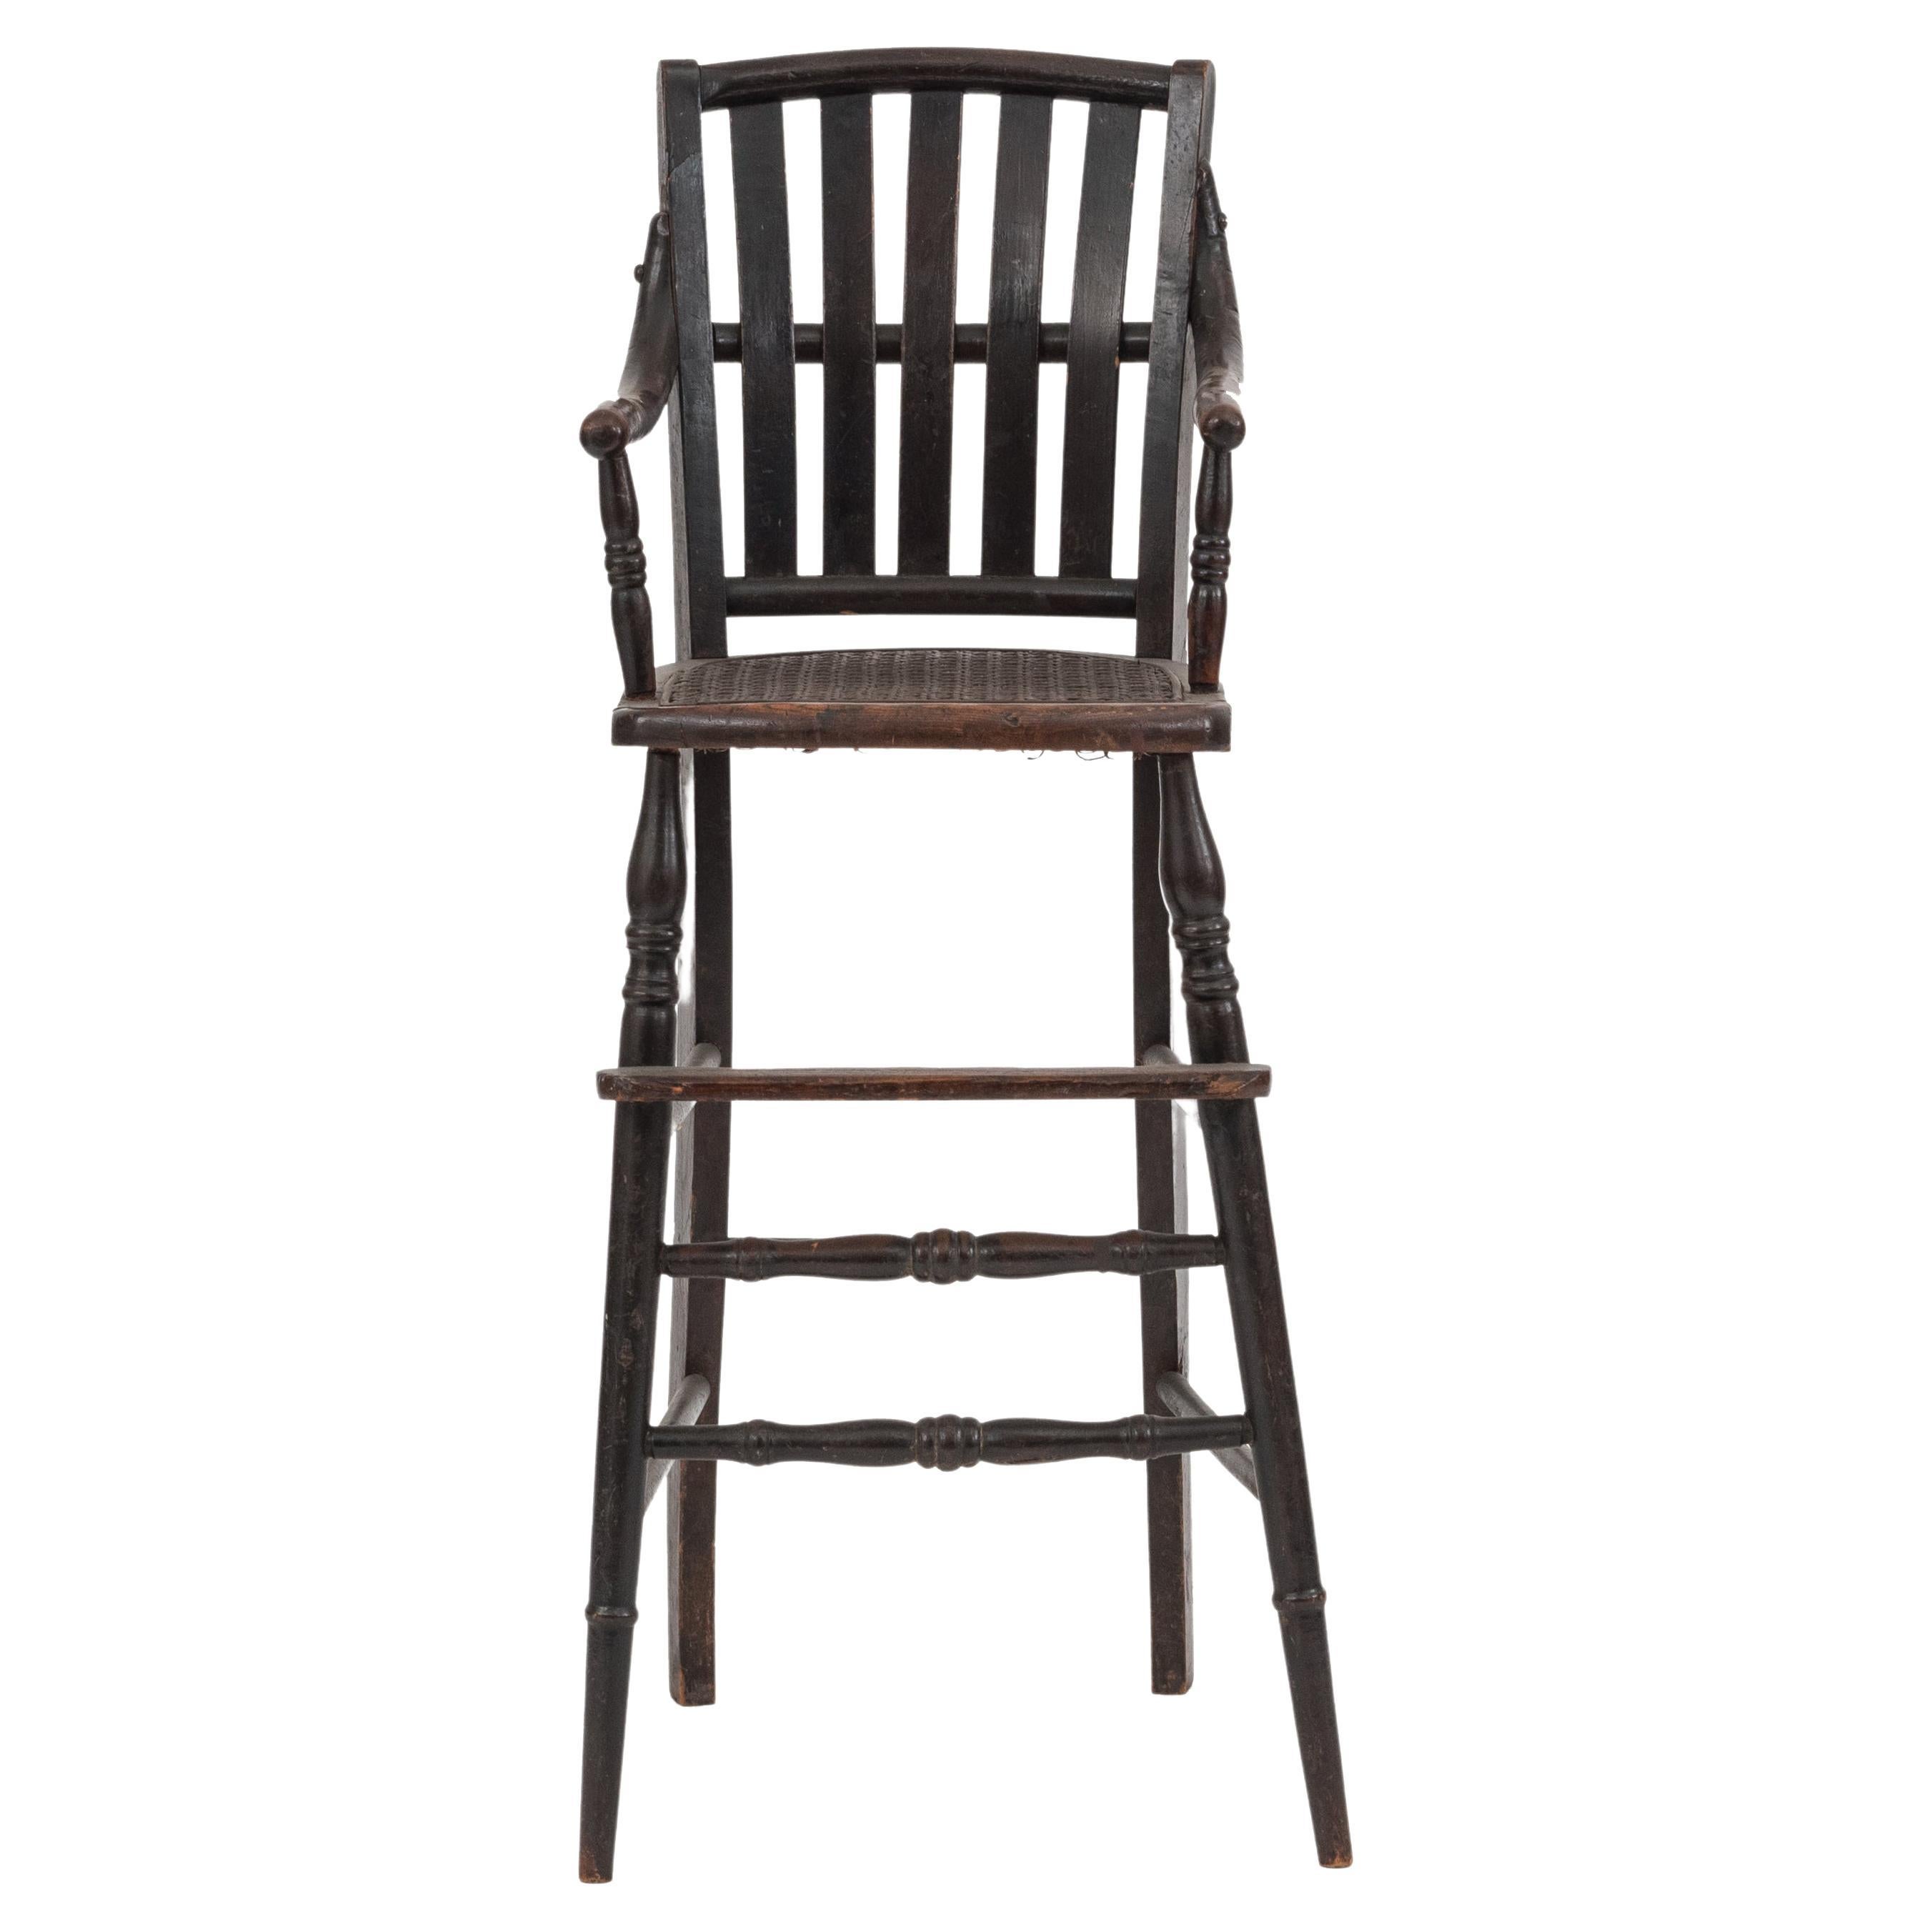 American Victorian High Chair For Sale at 1stDibs